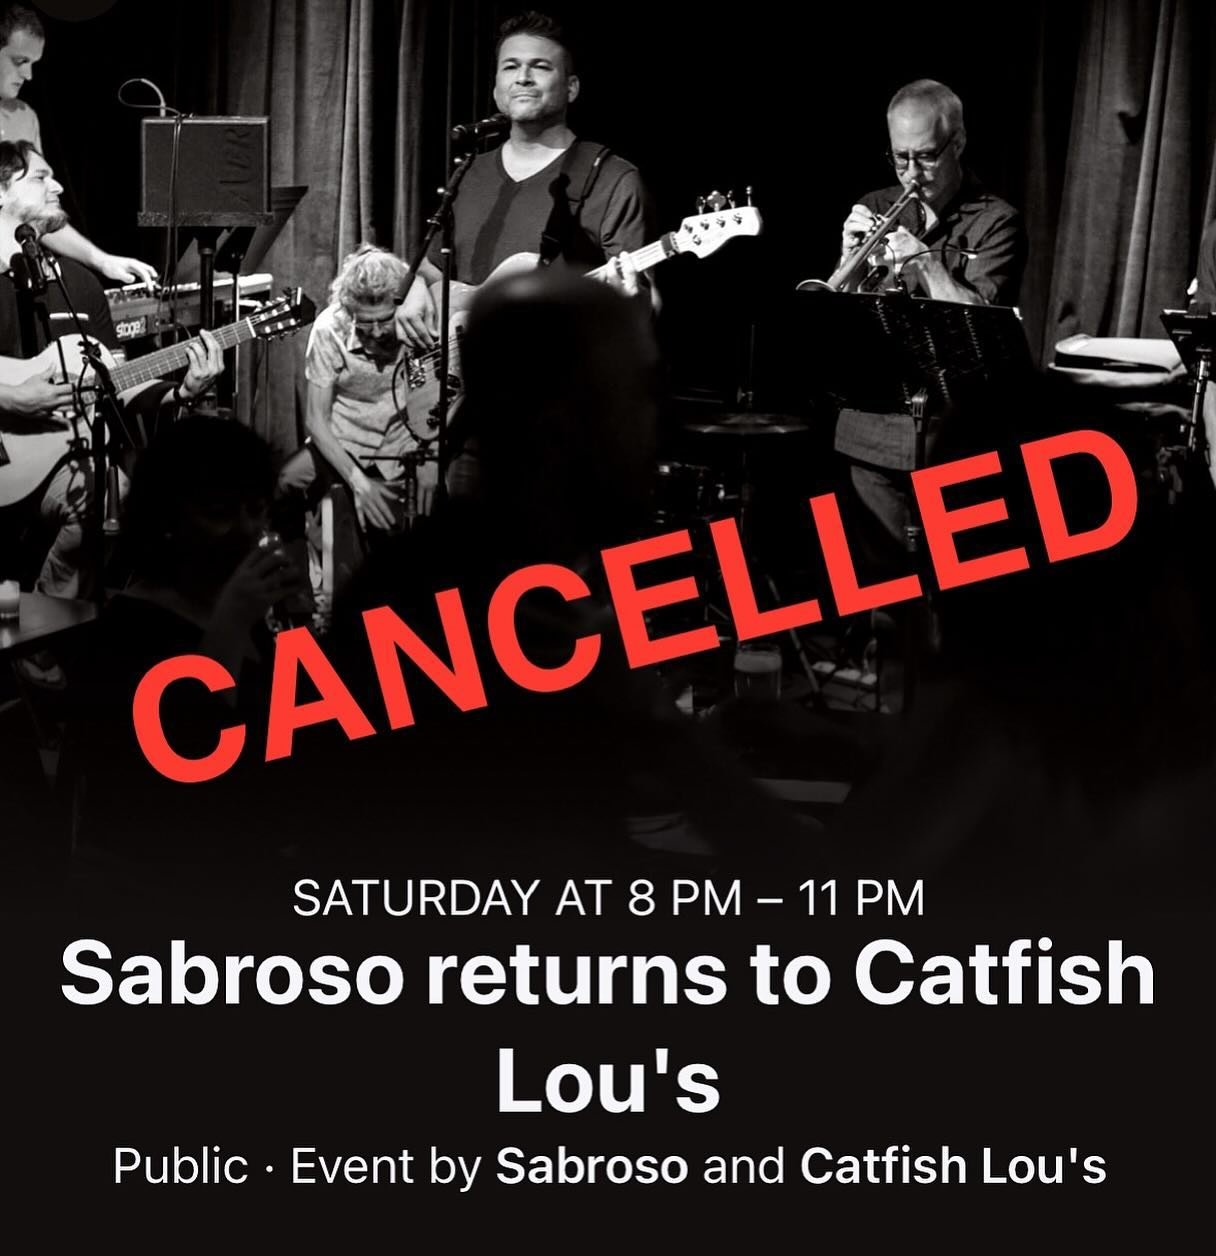 We apologize to our fans that planned on attending but due to unforeseen circumstances we are canceling our performance at Catfish Lou&rsquo;s Saturday.